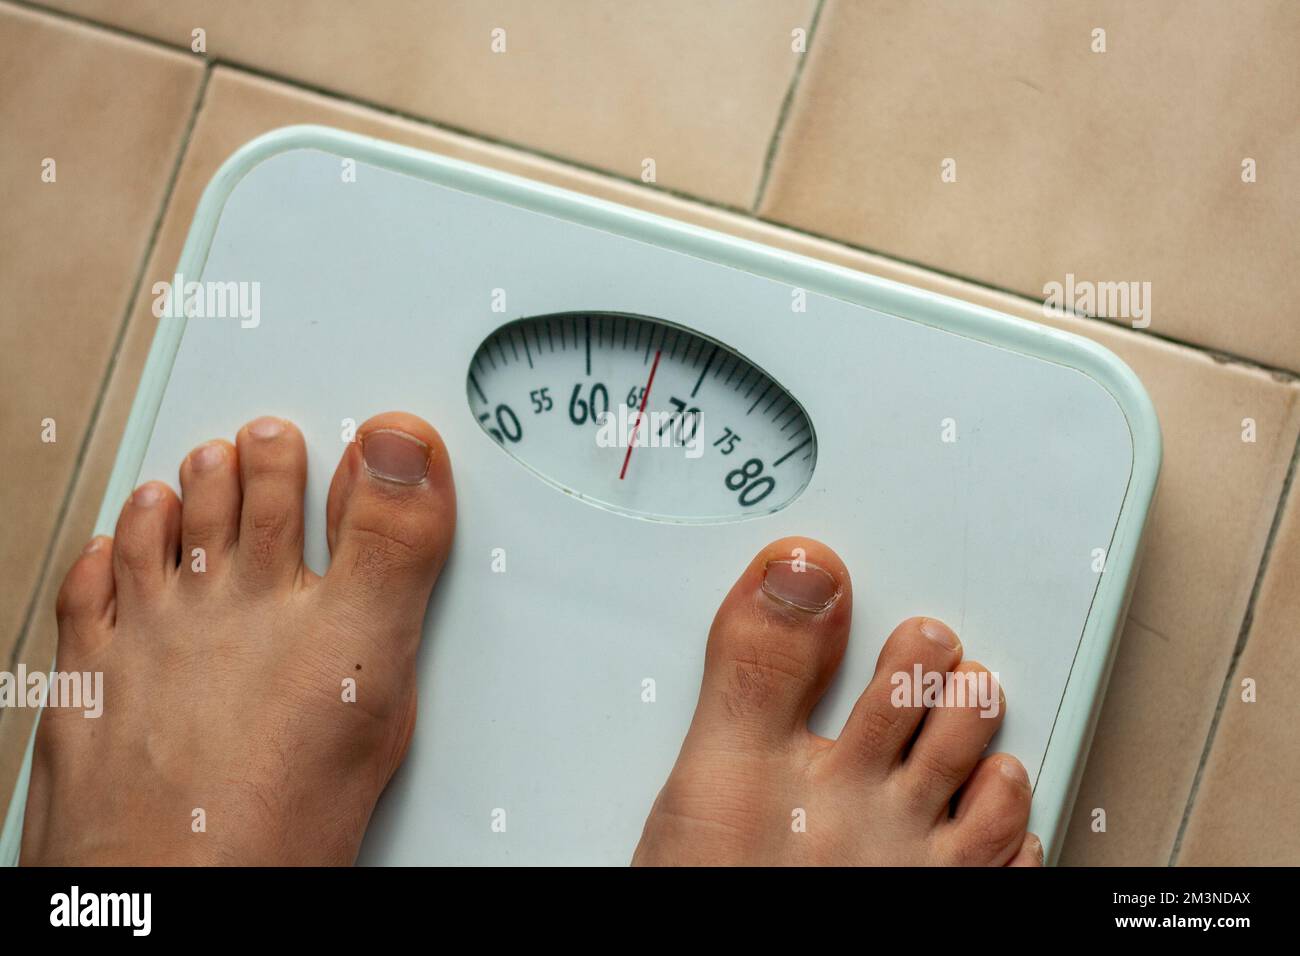 https://c8.alamy.com/comp/2M3NDAX/analog-scale-where-a-person-is-weighed-and-its-weight-can-be-seen-in-kg-2M3NDAX.jpg